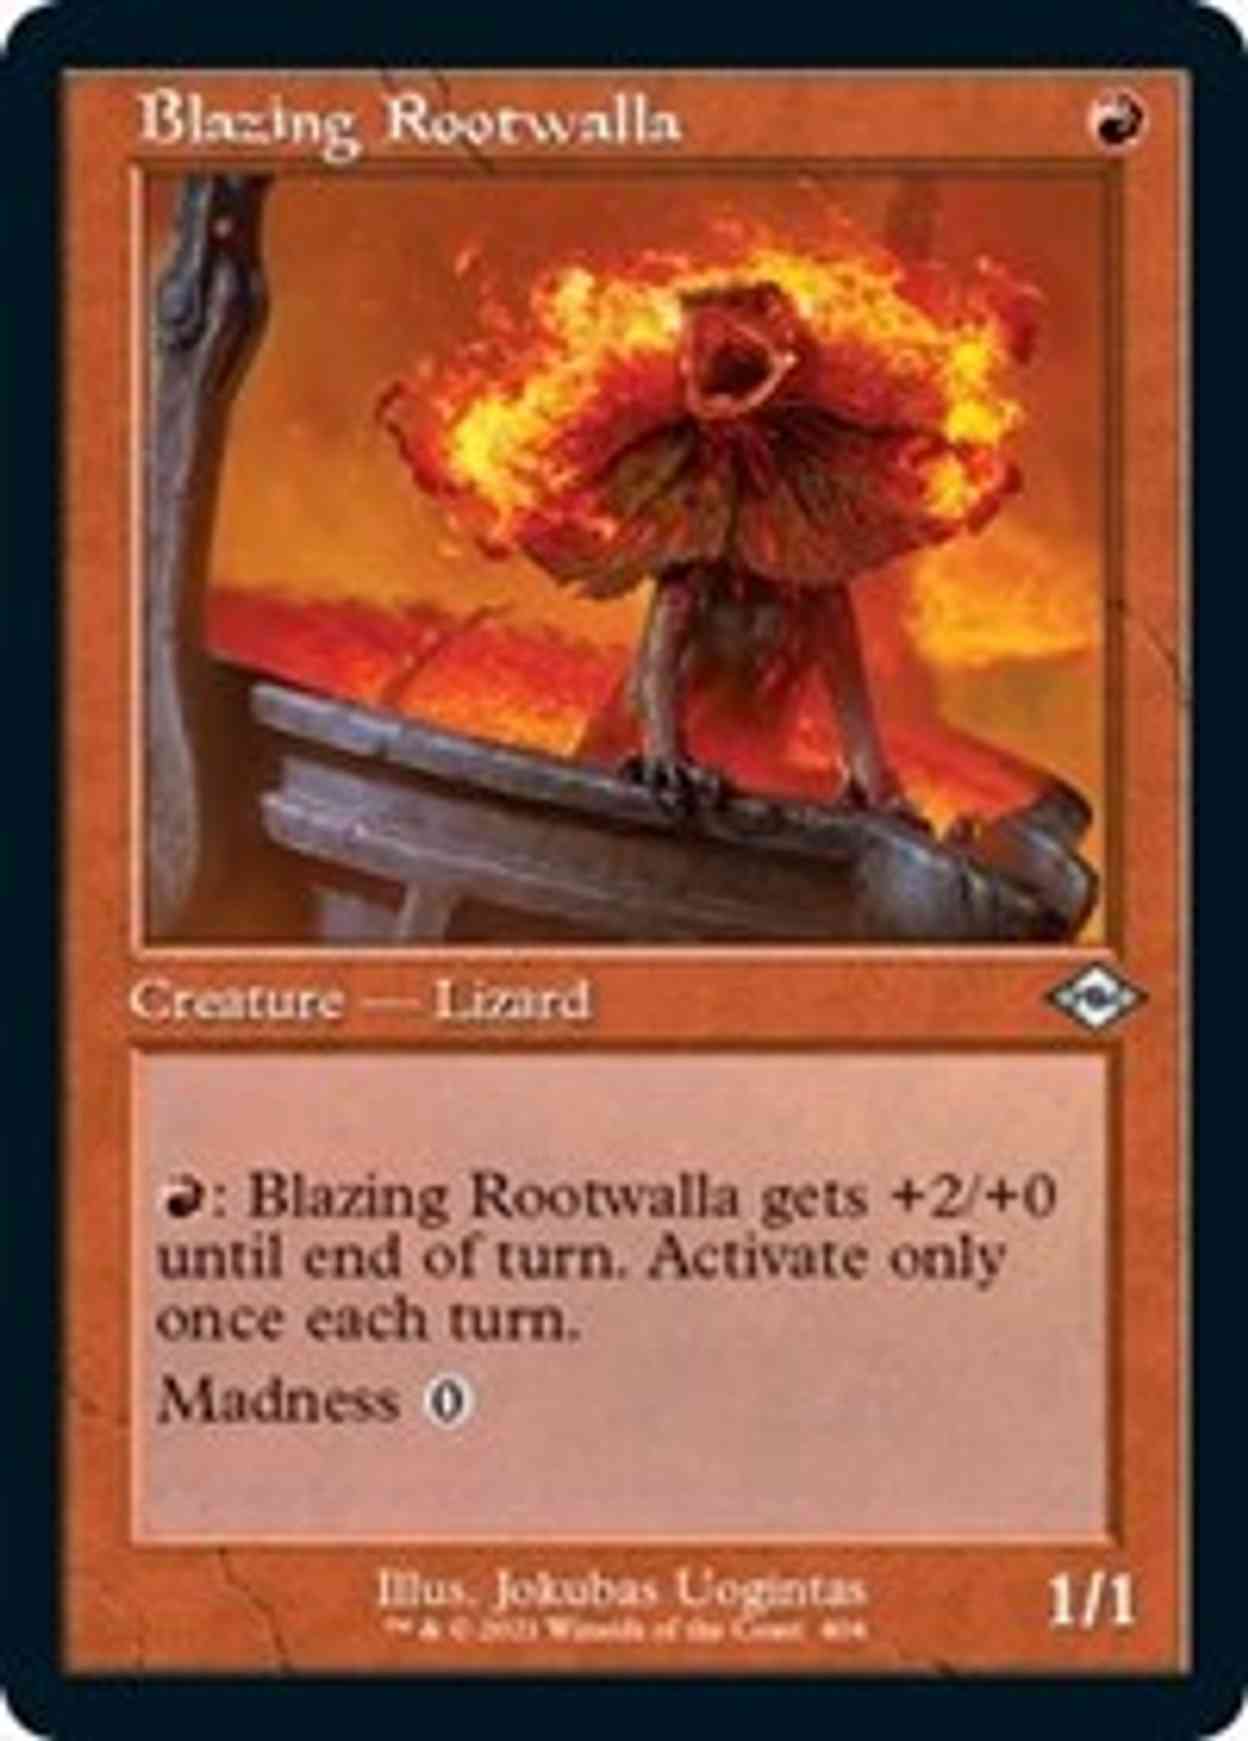 Blazing Rootwalla (Retro Frame) (Foil Etched) magic card front